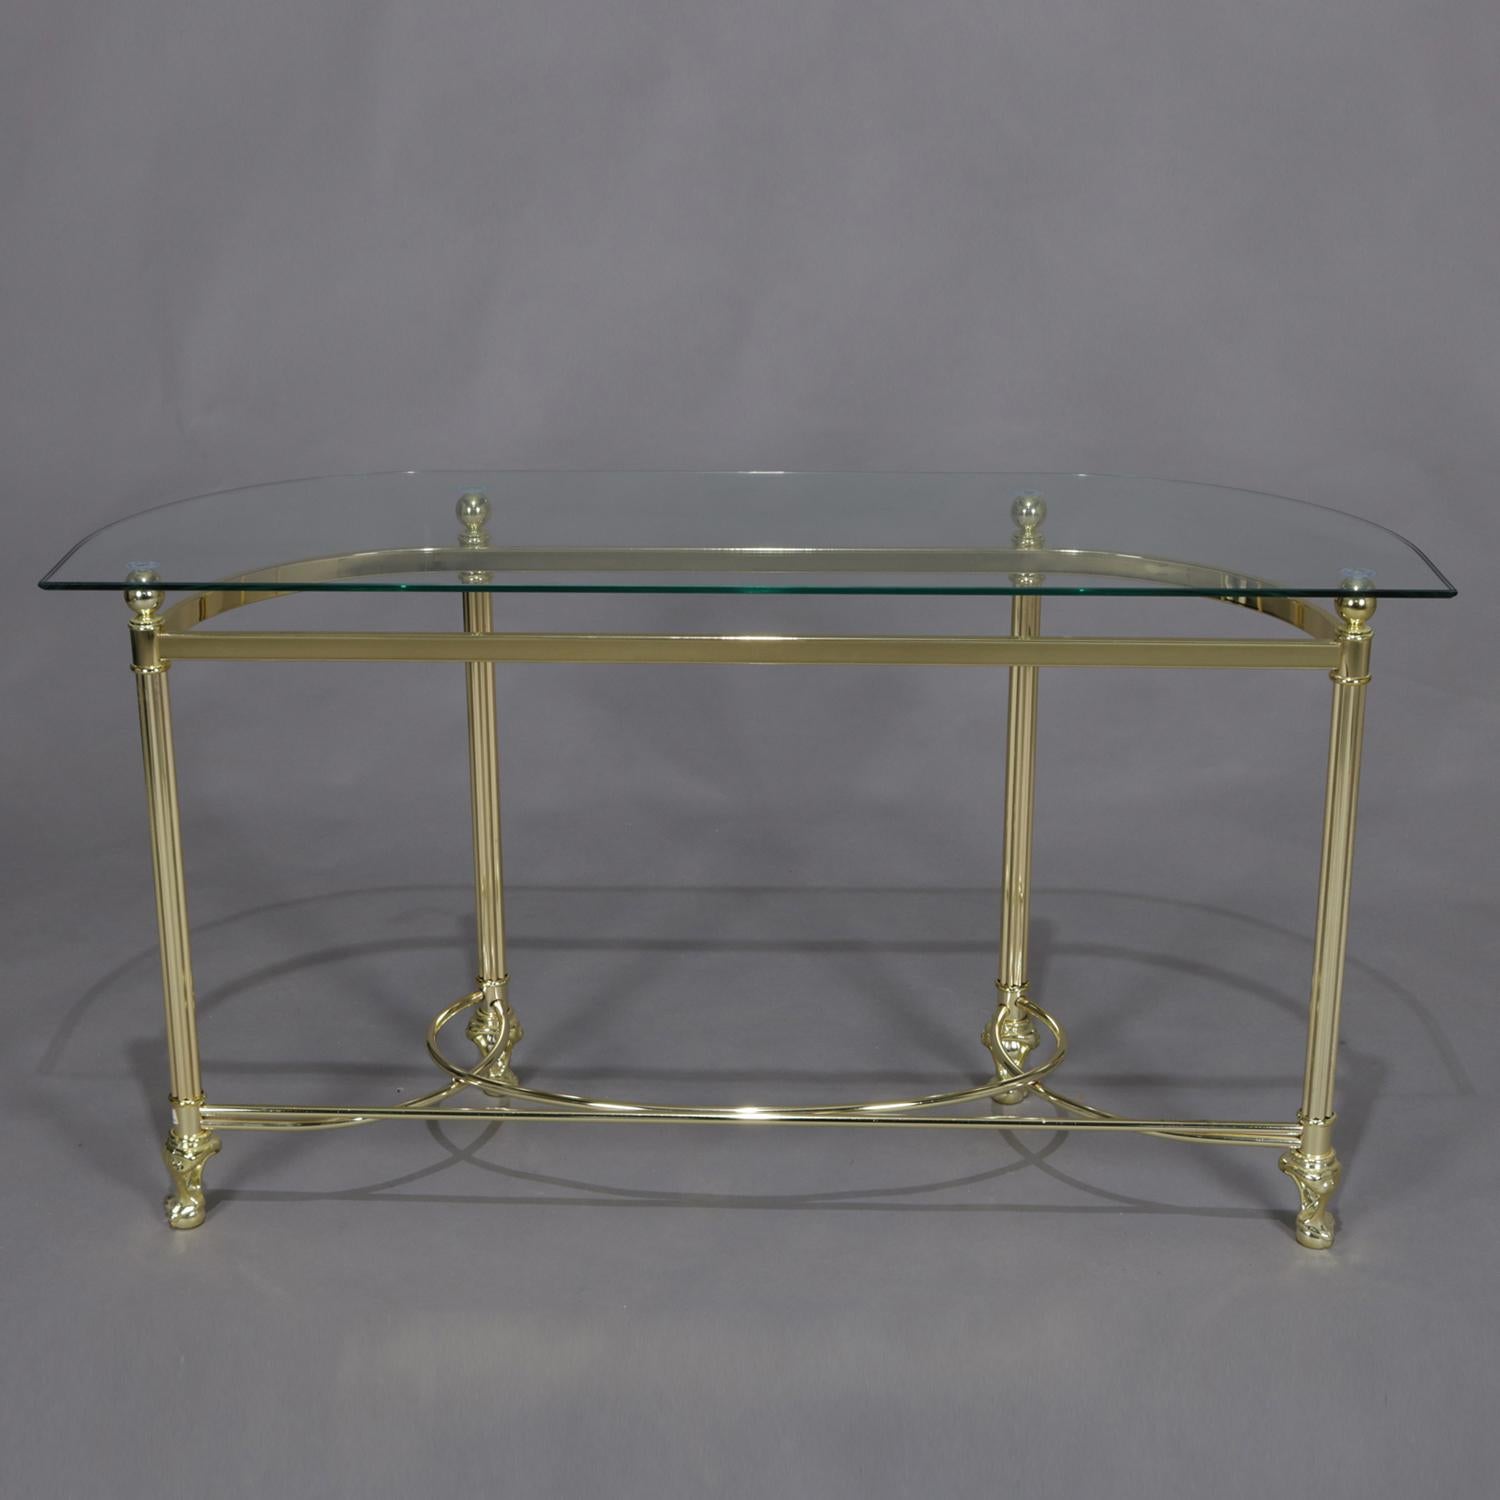 Italian Midcentury Transitional Paw Foot Brass and Glass Console Table 1